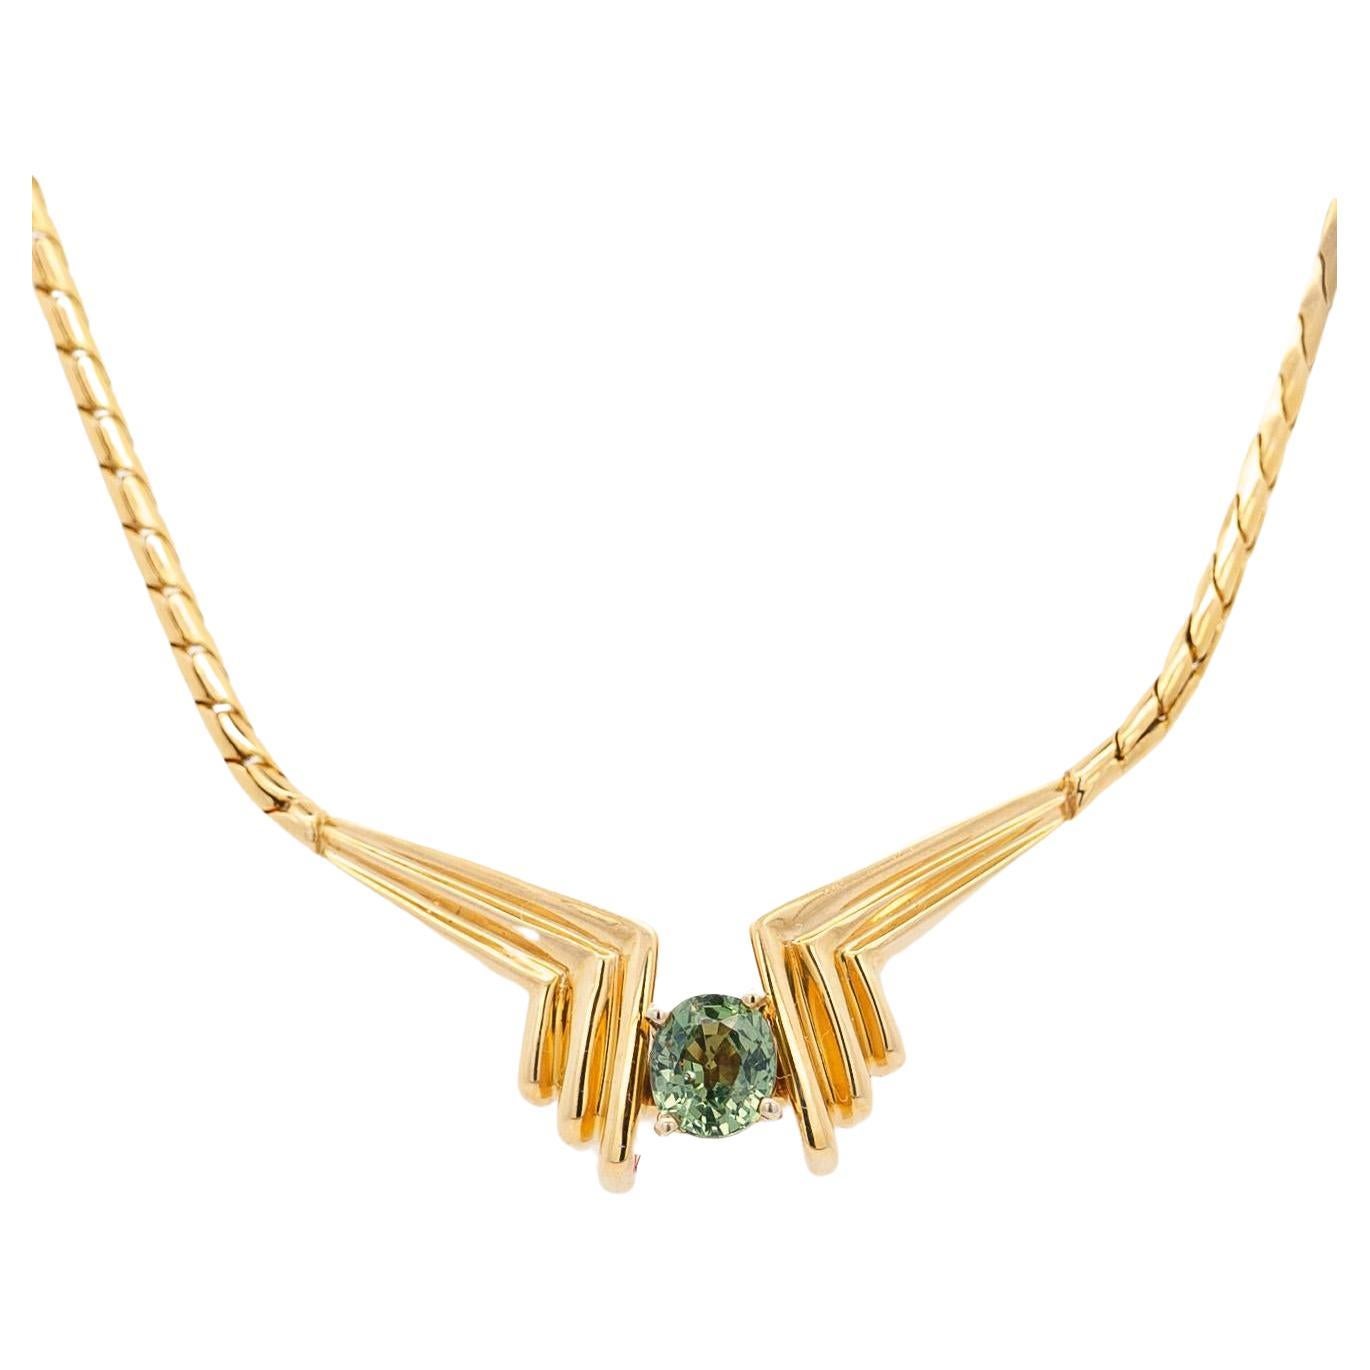 2 Carat Green Sapphire Wonder Woman 14K Gold Snake Chain Necklace For Sale